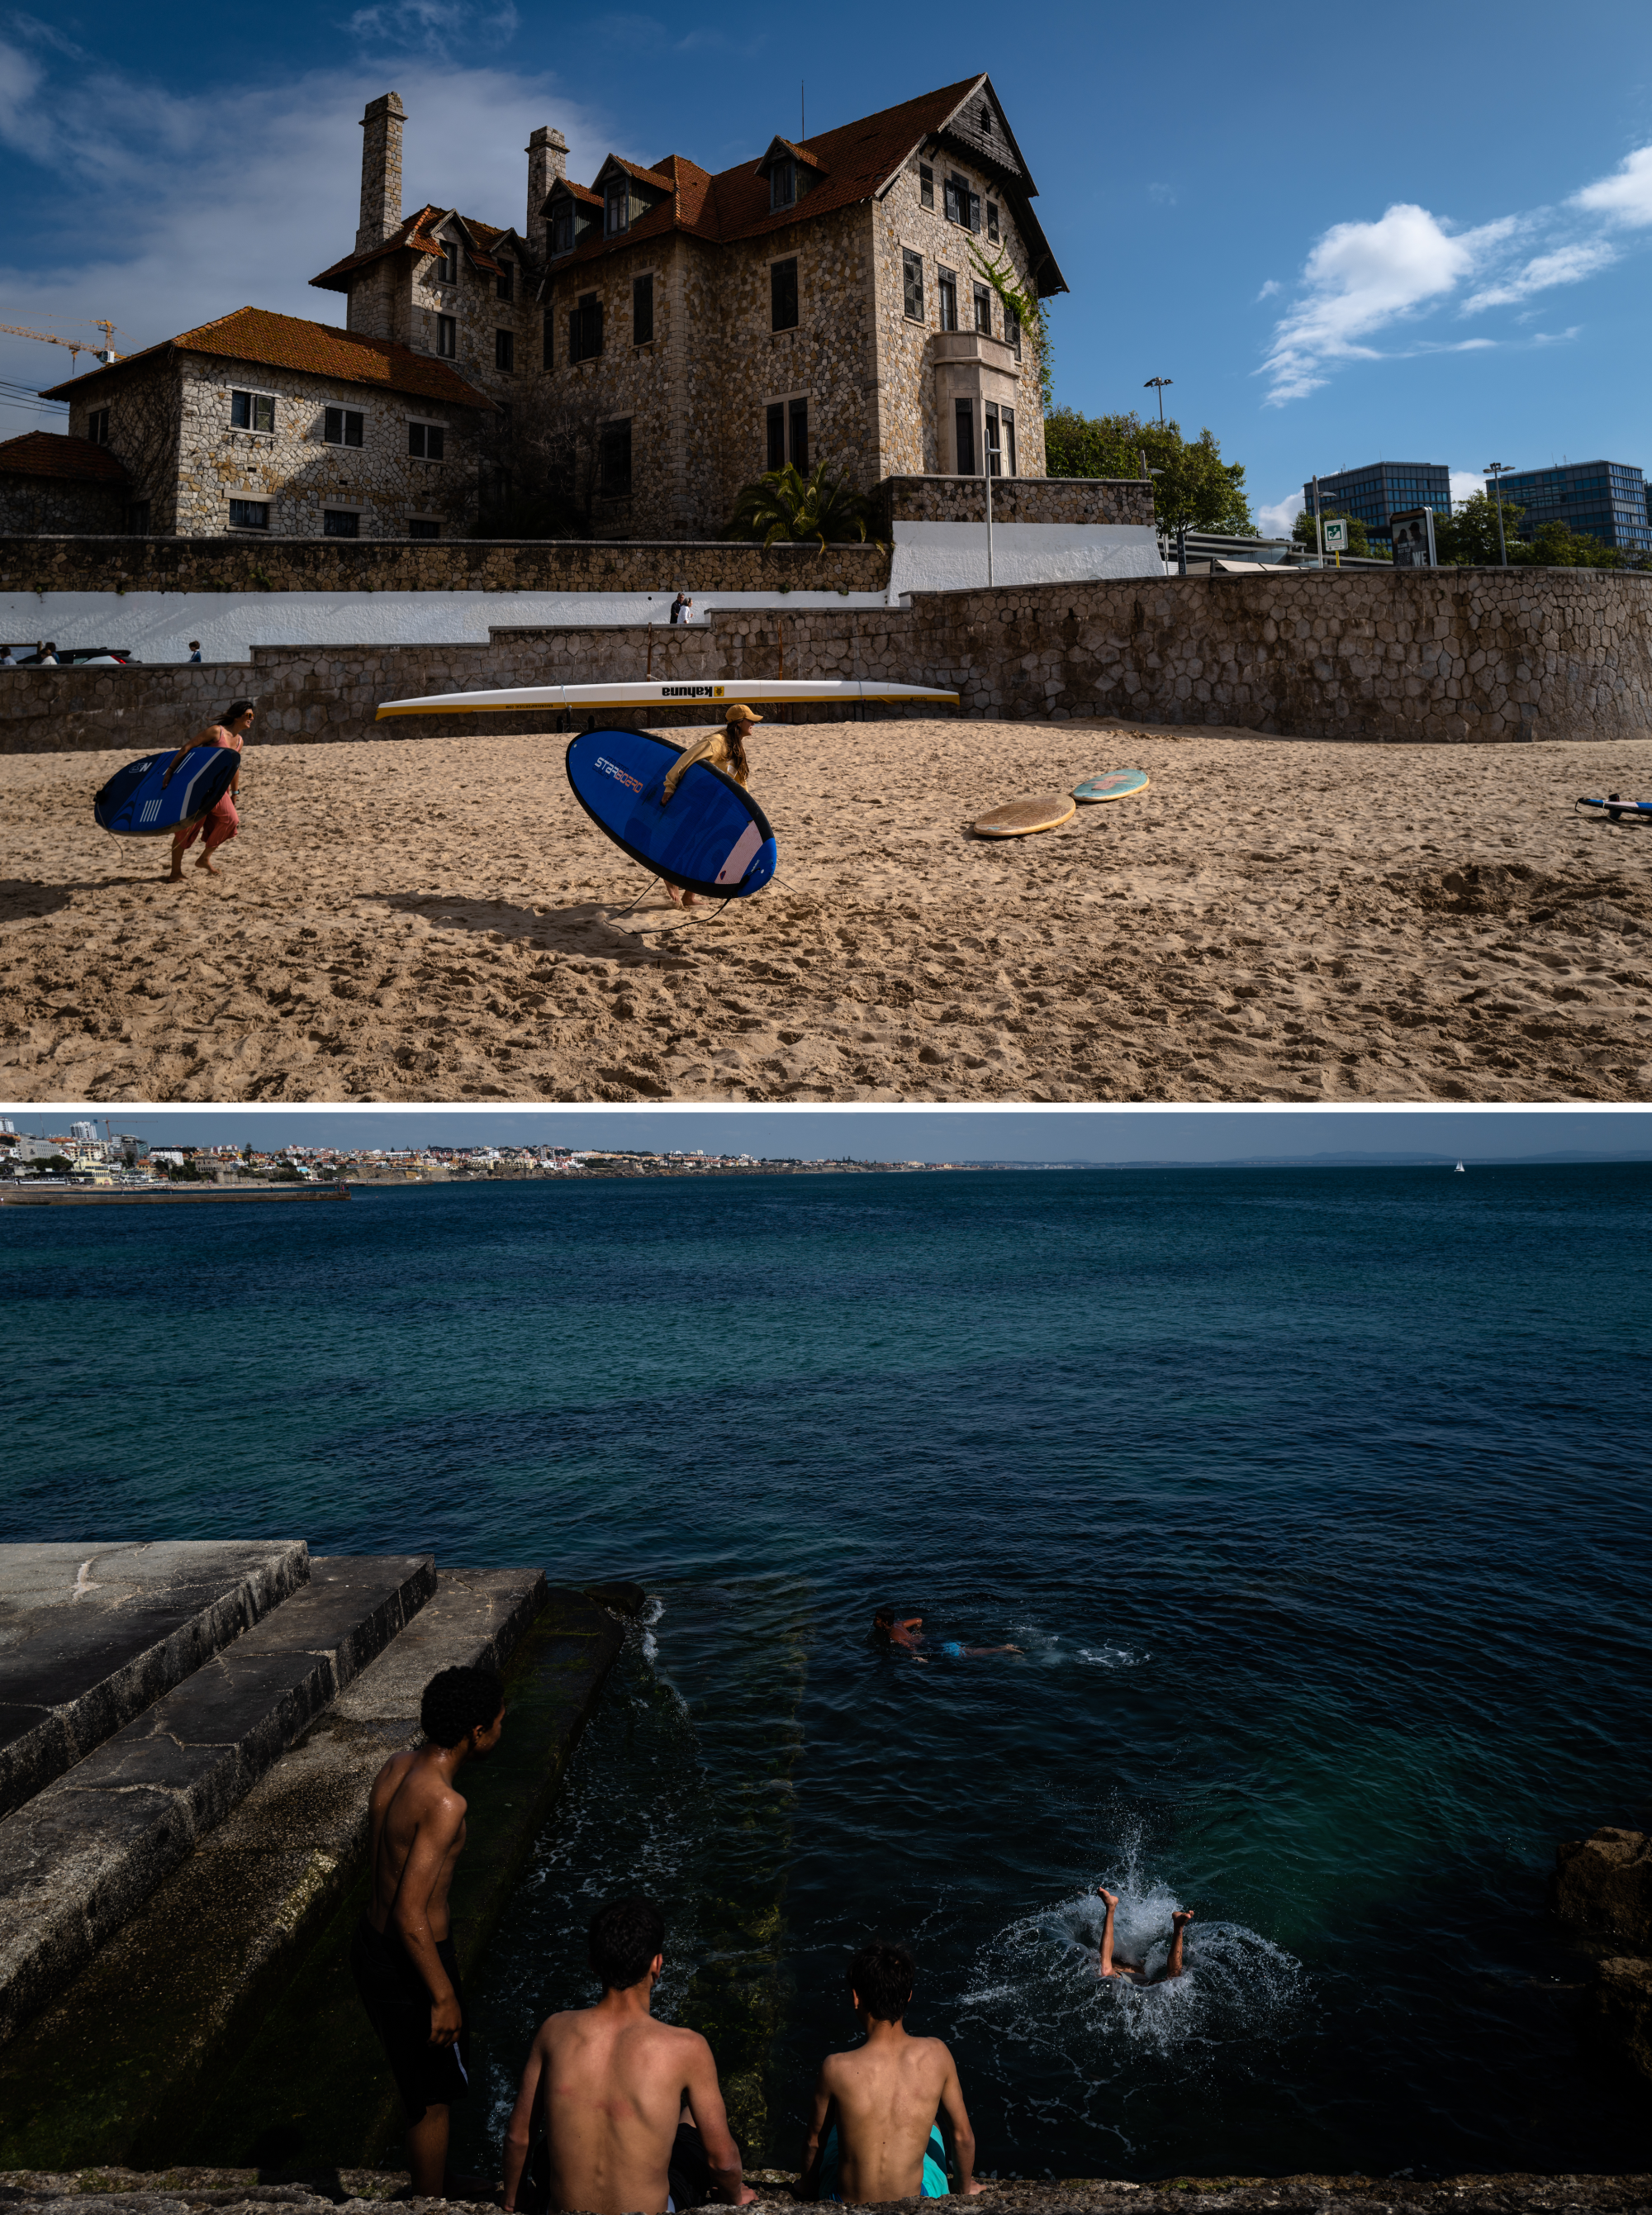 In top photo, two women carry surfboards at a beach. In the bottom photo, swimmers dive into the blue waters. 